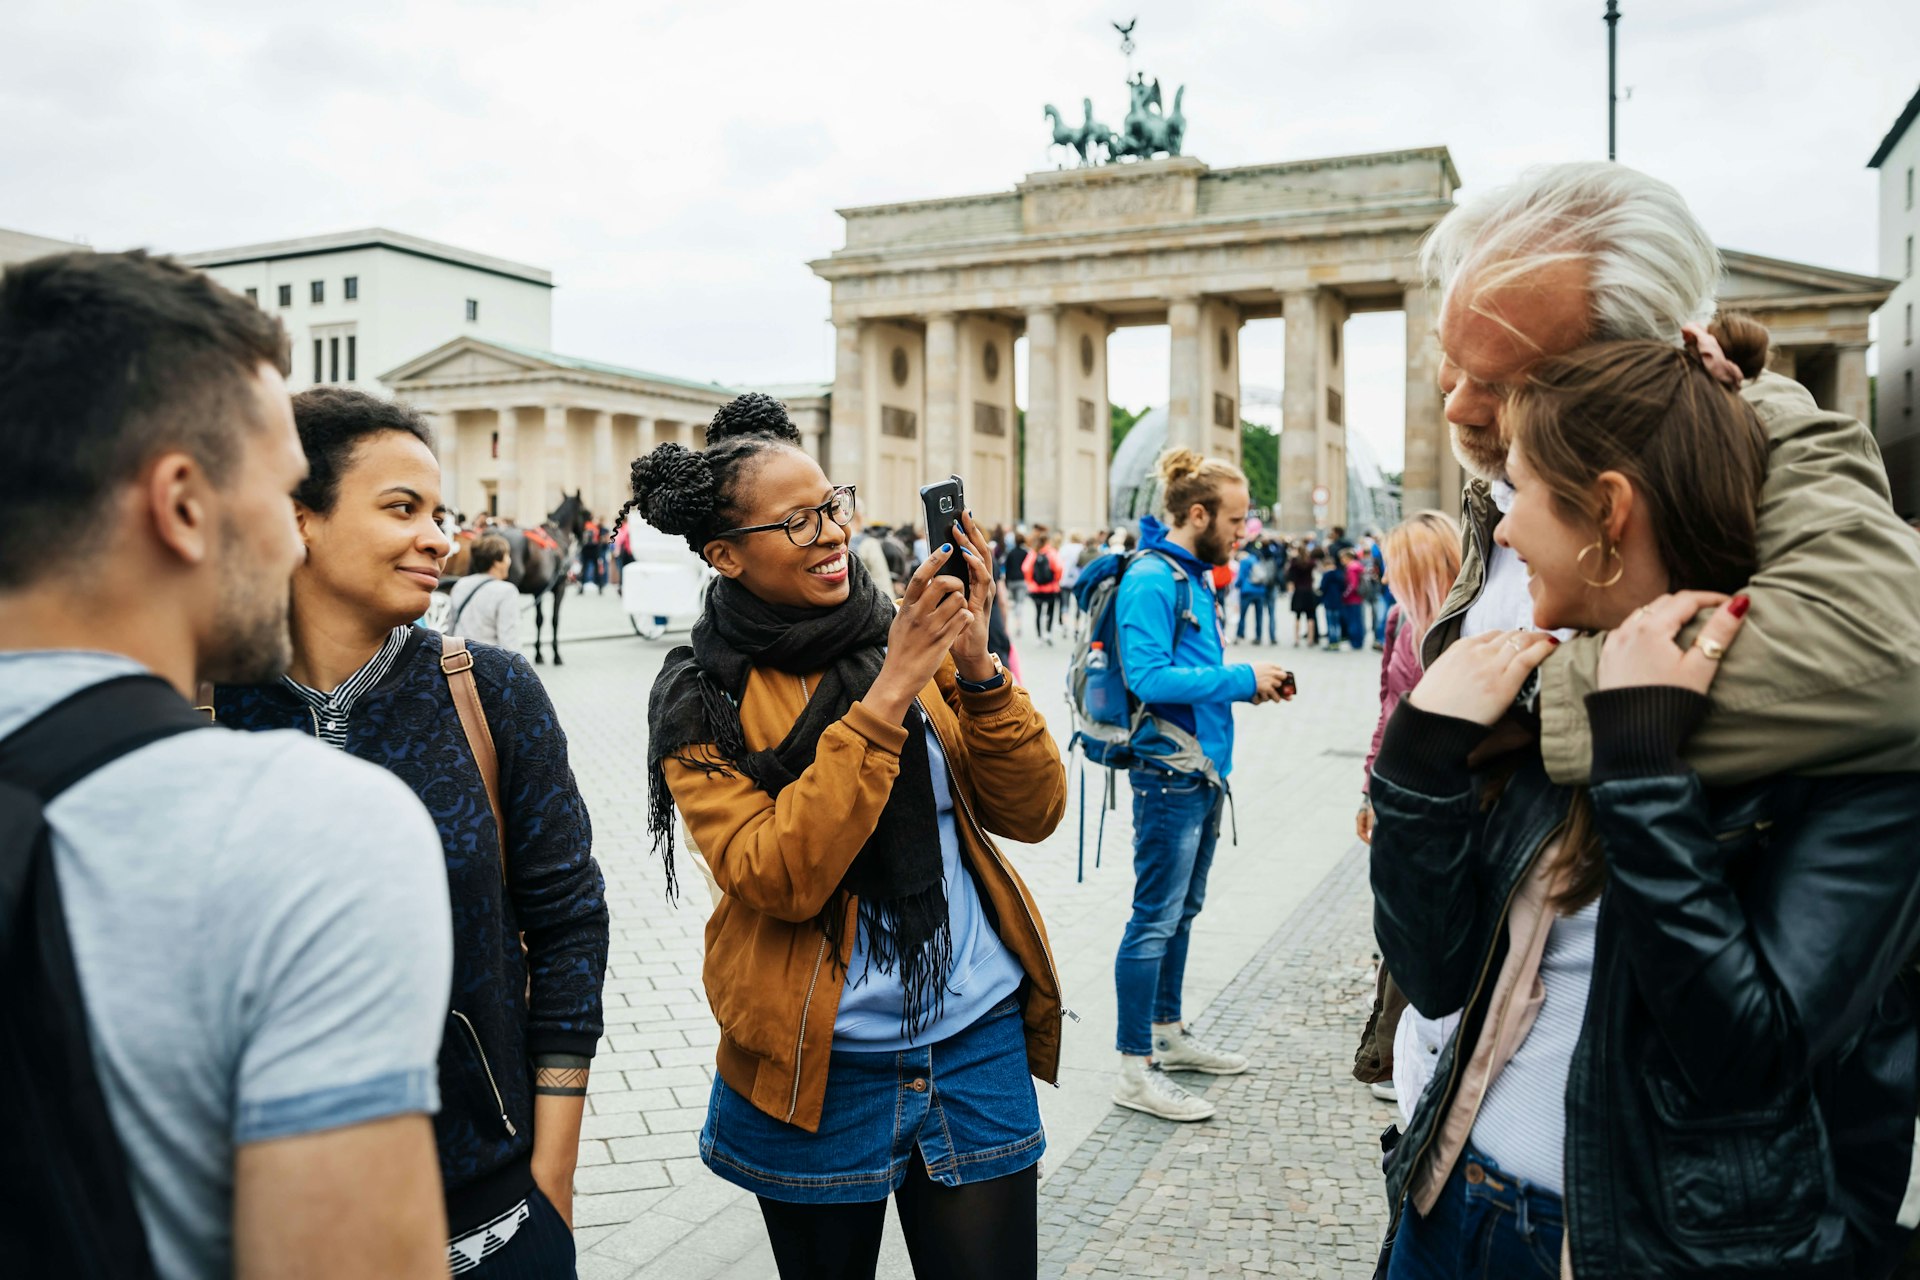 A young woman takes a photo of friends at Brandenburg Gate in Berlin, Germany